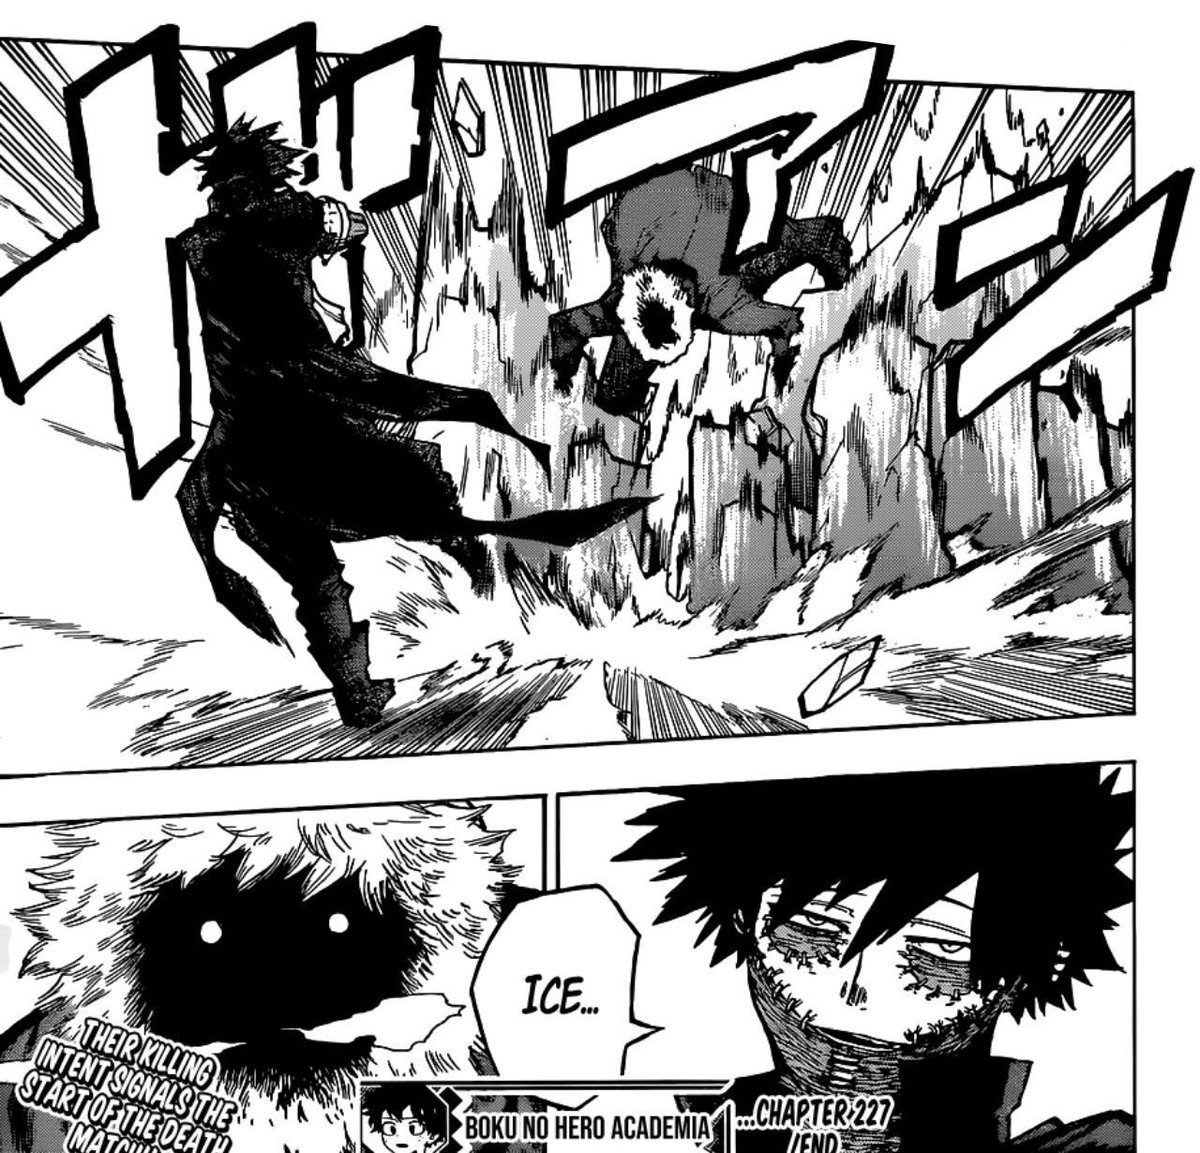 BNHA SPOILER ALERT This person haves ice quirk and i can't stop thinki...